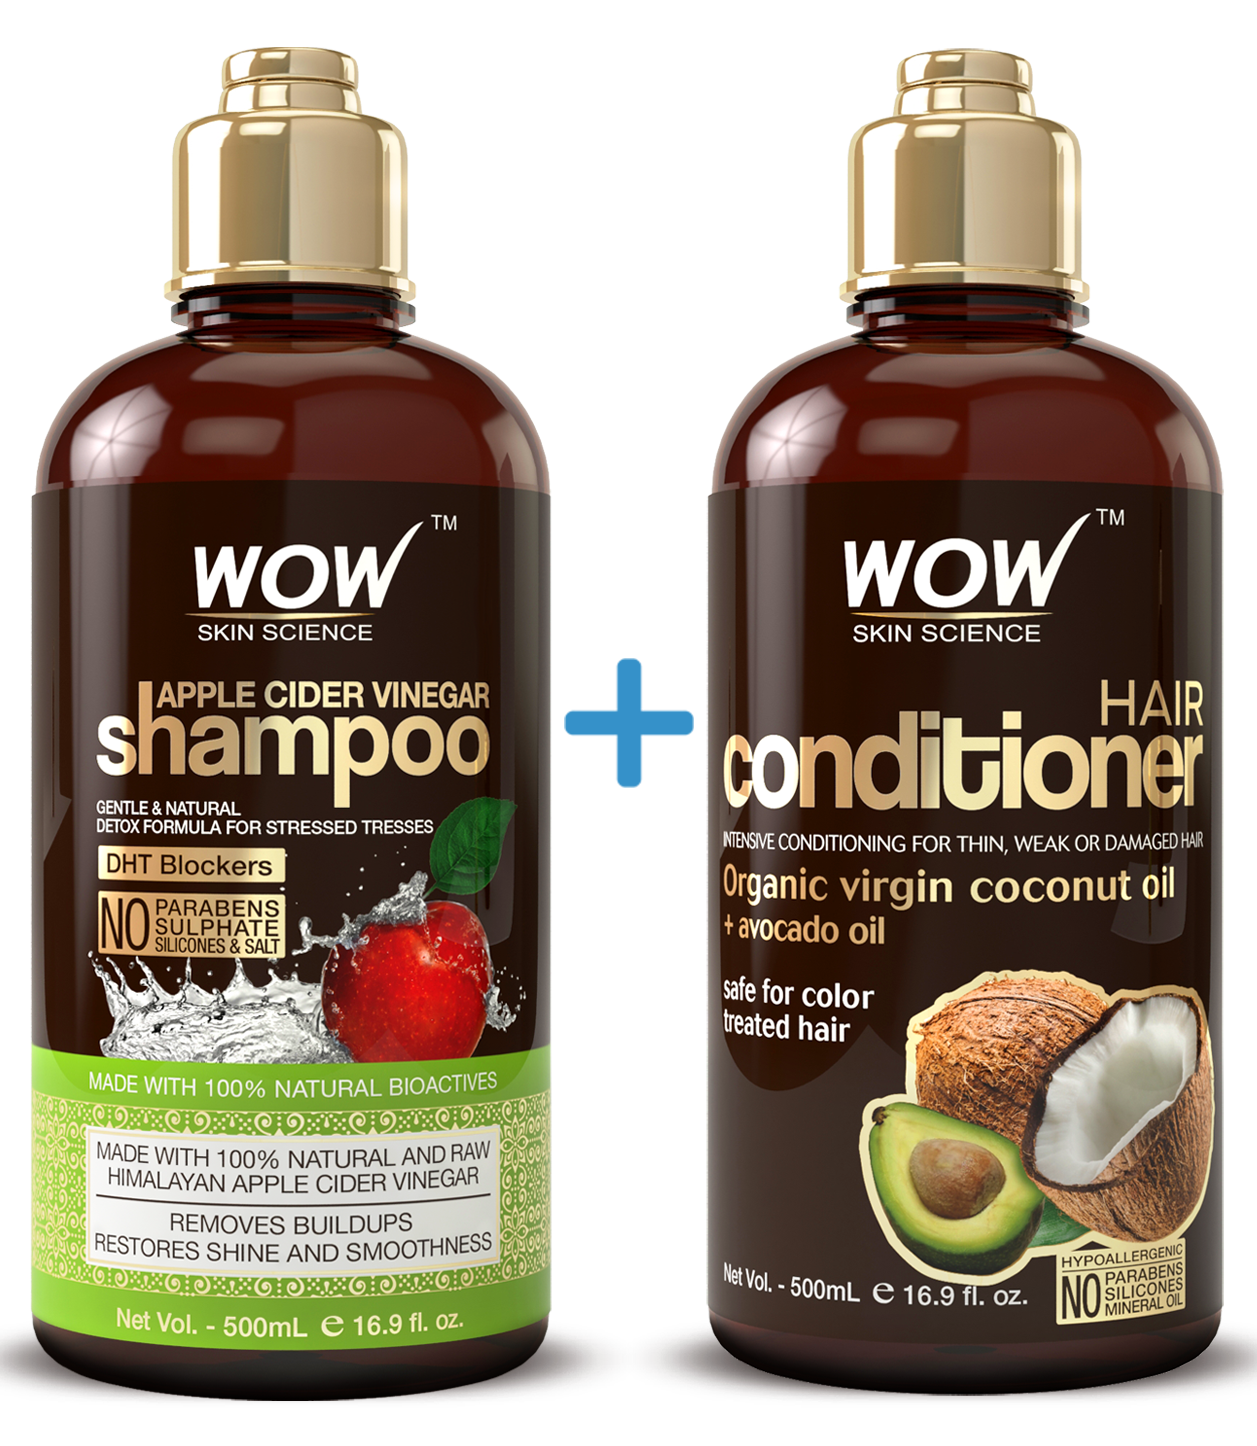 WOW Shampoo and Conditioner Set - All Natural, Sulfate Free For Dandruff - 16.9